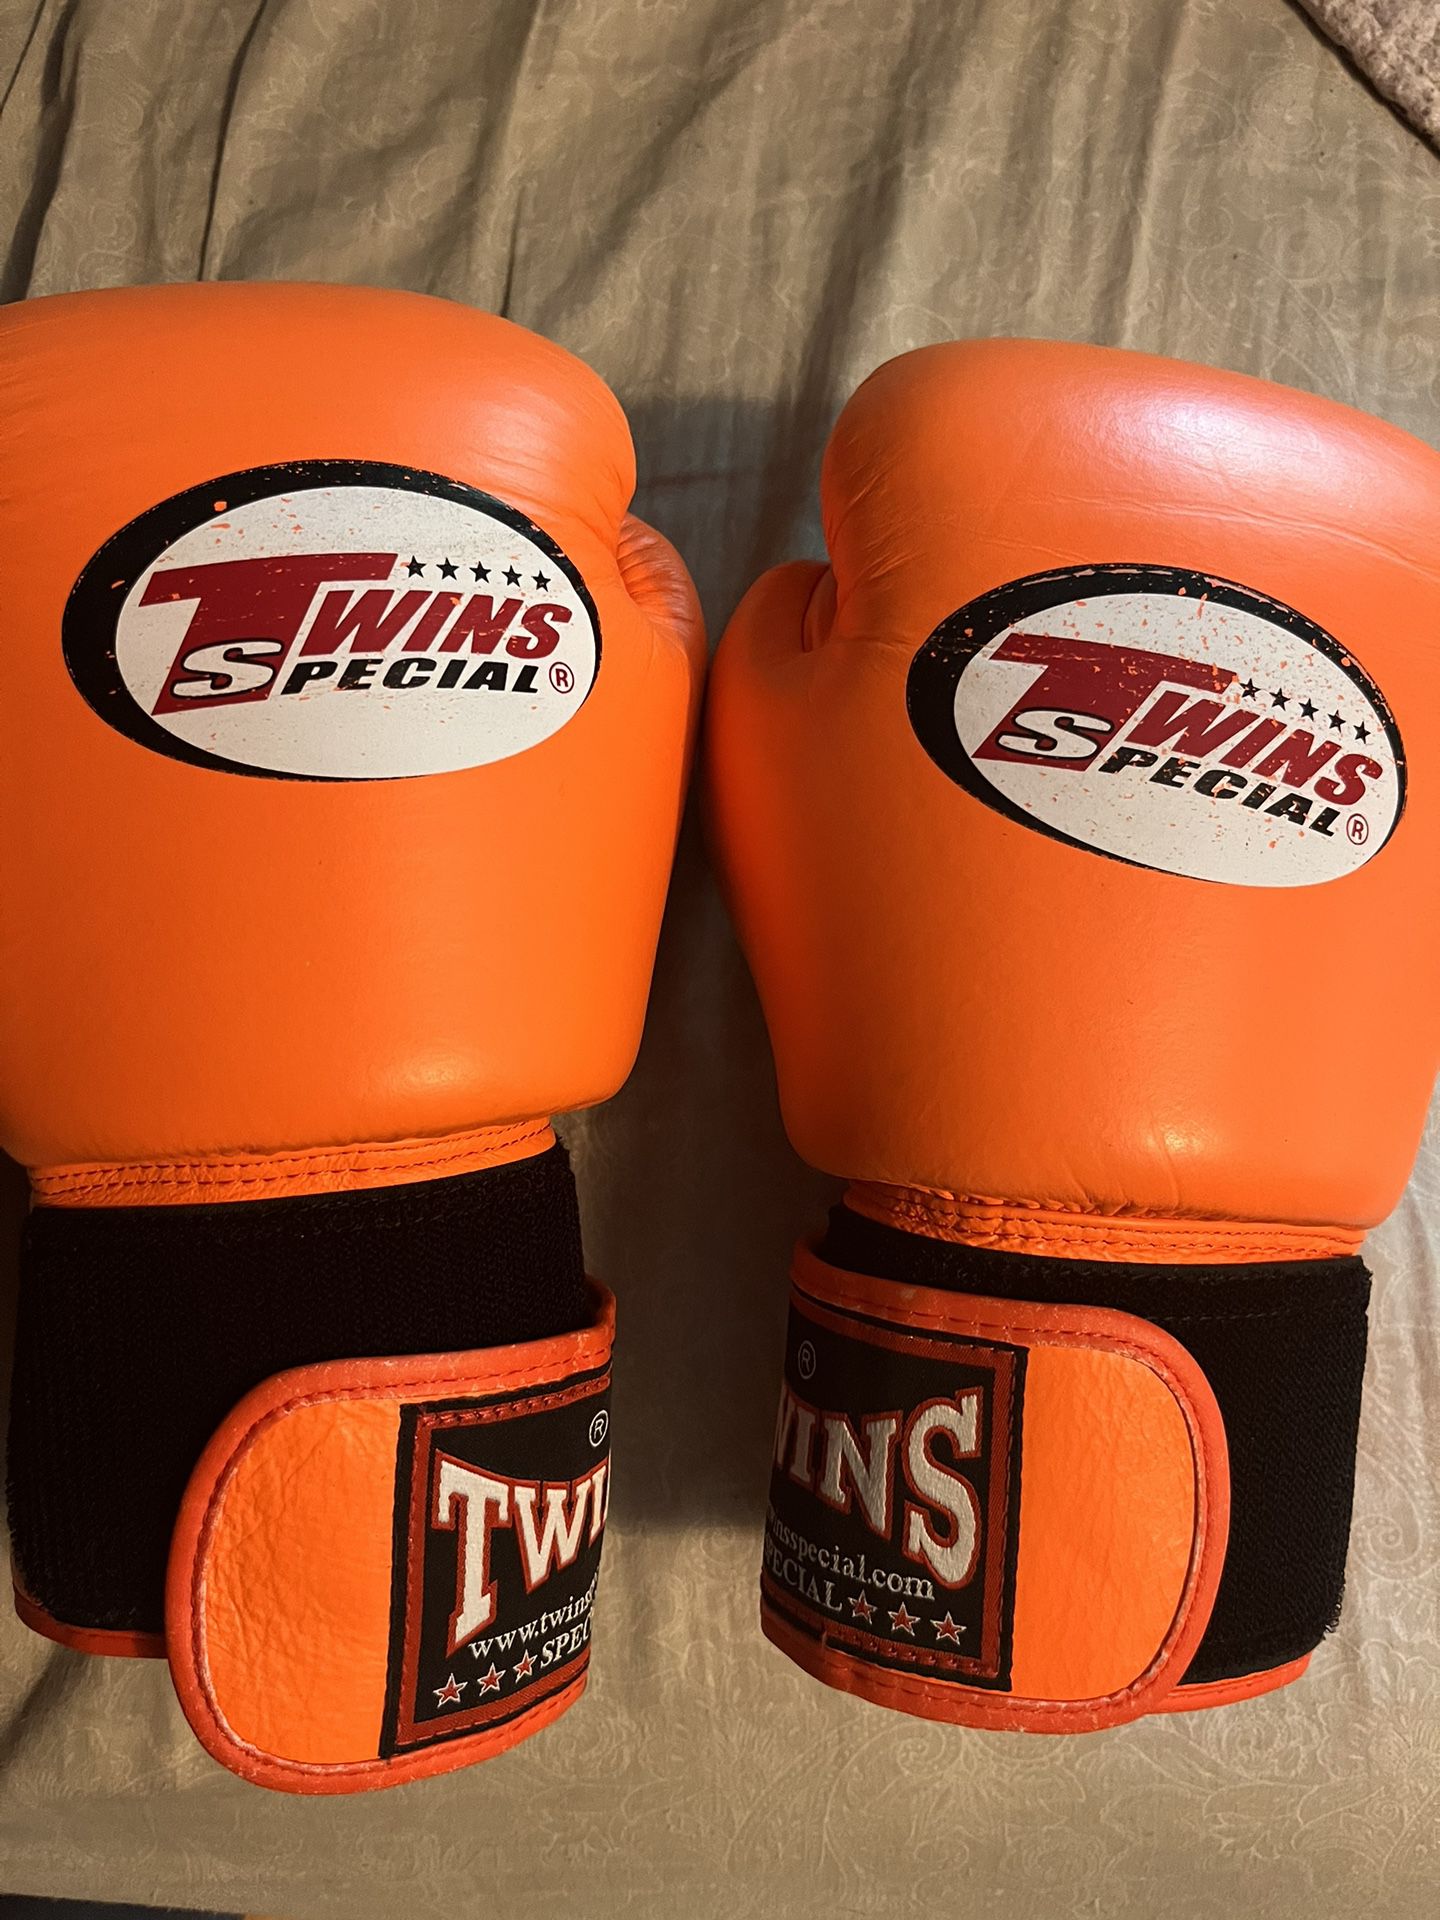 Twins special Gloves 12 Oz